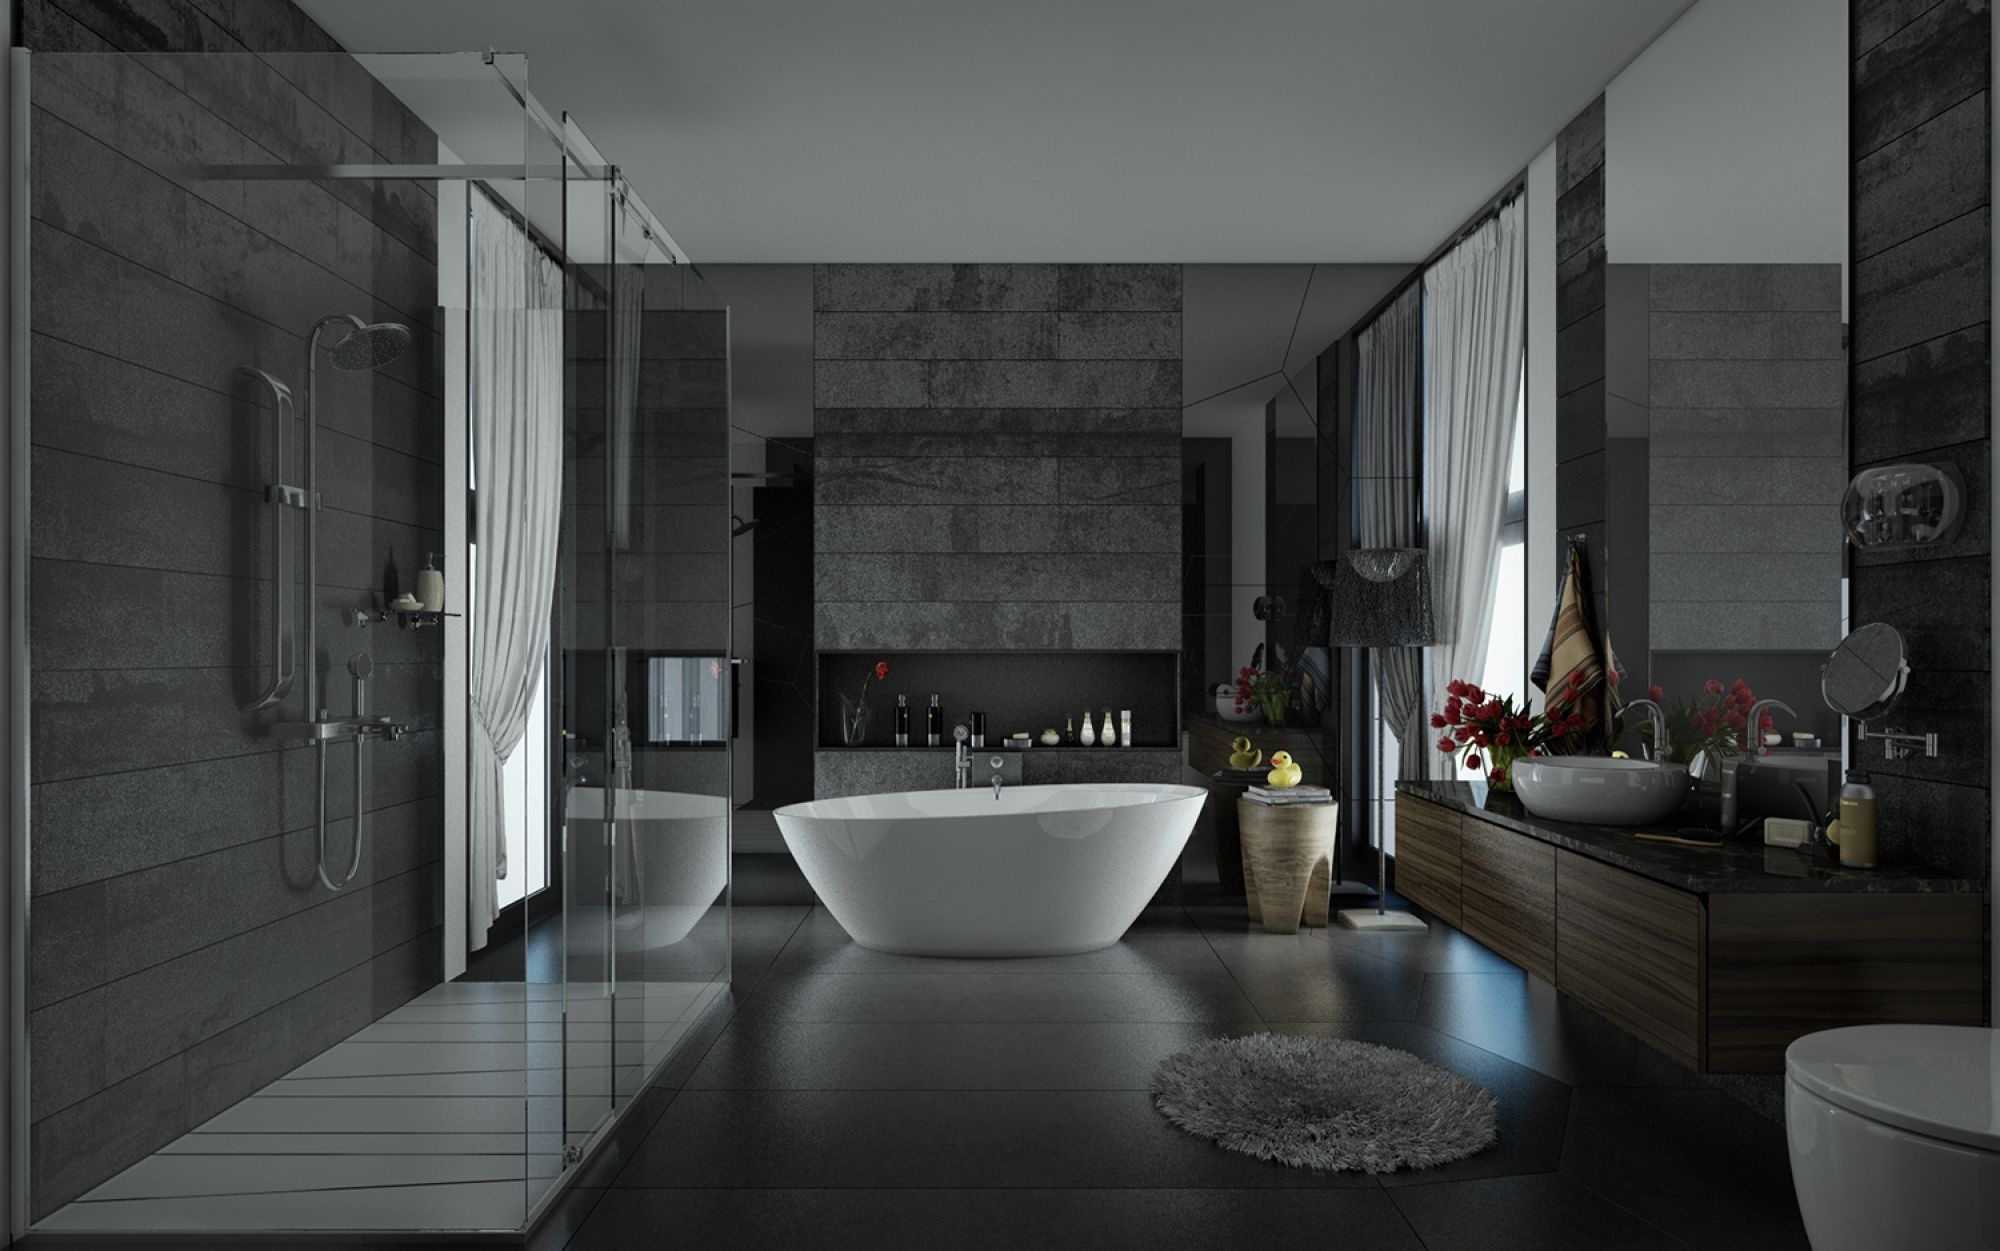 gray contemporary bathroom "width =" 2000 "height =" 1251 "srcset =" https://mileray.com/wp-content/uploads/2020/05/1588515321_868_Contemporary-Bathroom-Design-Ideas-Complete-With-Perfect-Bathtubs-Bring-a.jpg 2000w, https://mileray.com/ wp-content / uploads / 2016/09 / Blalank-Visualization-300x188.jpg 300w, https://mileray.com/wp-content/uploads/2016/09/Blalank-Visualization-768x480.jpg 768w, https: // mileray.com/wp-content/uploads/2016/09/Blalank-Visualization-1024x641.jpg 1024w, https://mileray.com/wp-content/uploads/2016/09/Blalank-Visualization-696x435.jpg 696w, https://mileray.com/wp-content/uploads/2016/09/Blalank-Visualization-1068x668.jpg 1068w, https://mileray.com/wp-content/uploads/2016/09/Blalank-Visualization-671x420 .jpg 671w "sizes =" (maximum width: 2000px) 100vw, 2000px